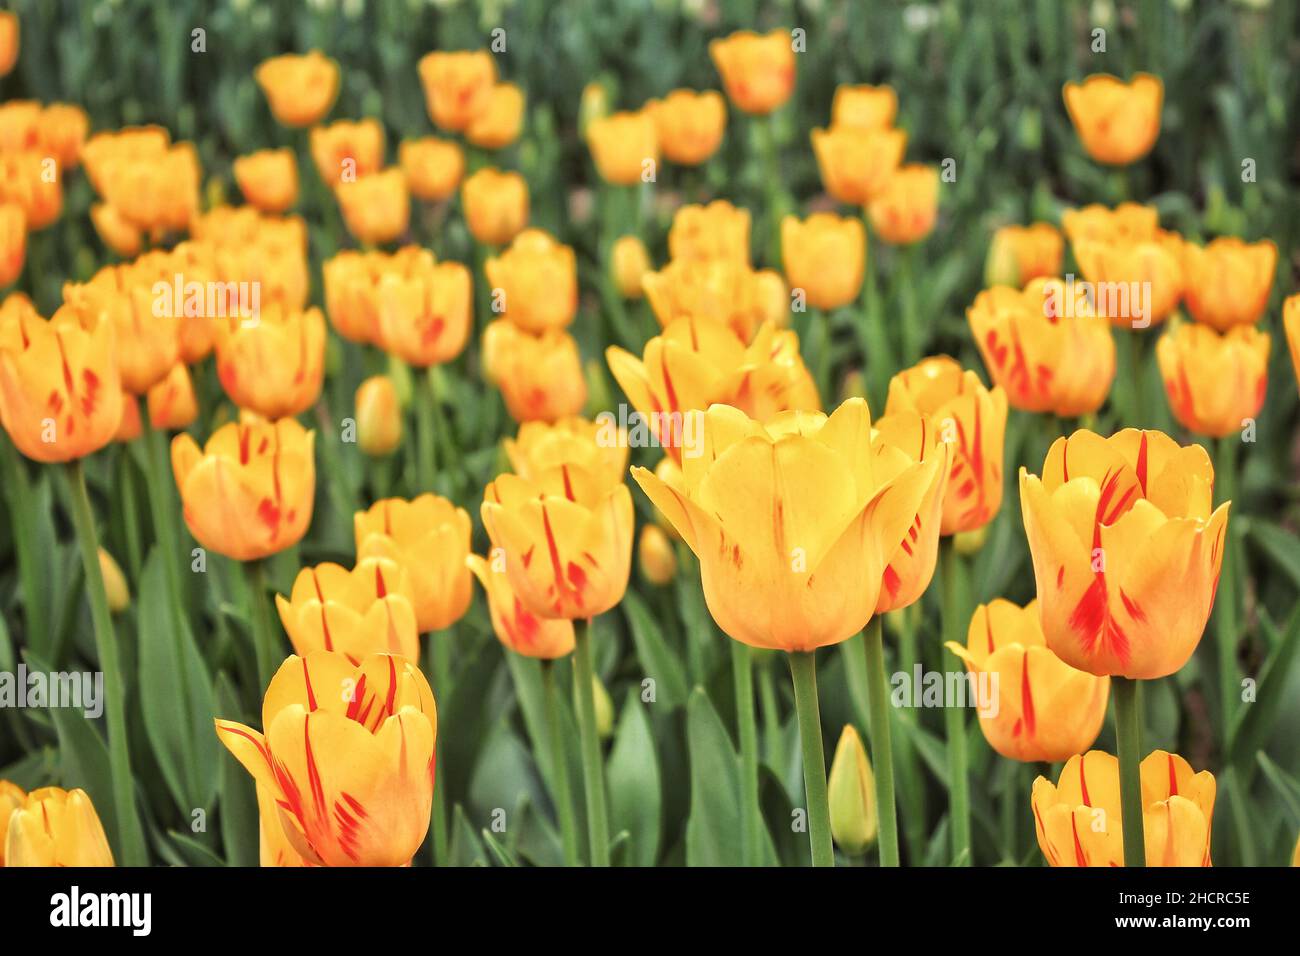 Closeup shot of yellow tulips on the field on a blurred background Stock Photo